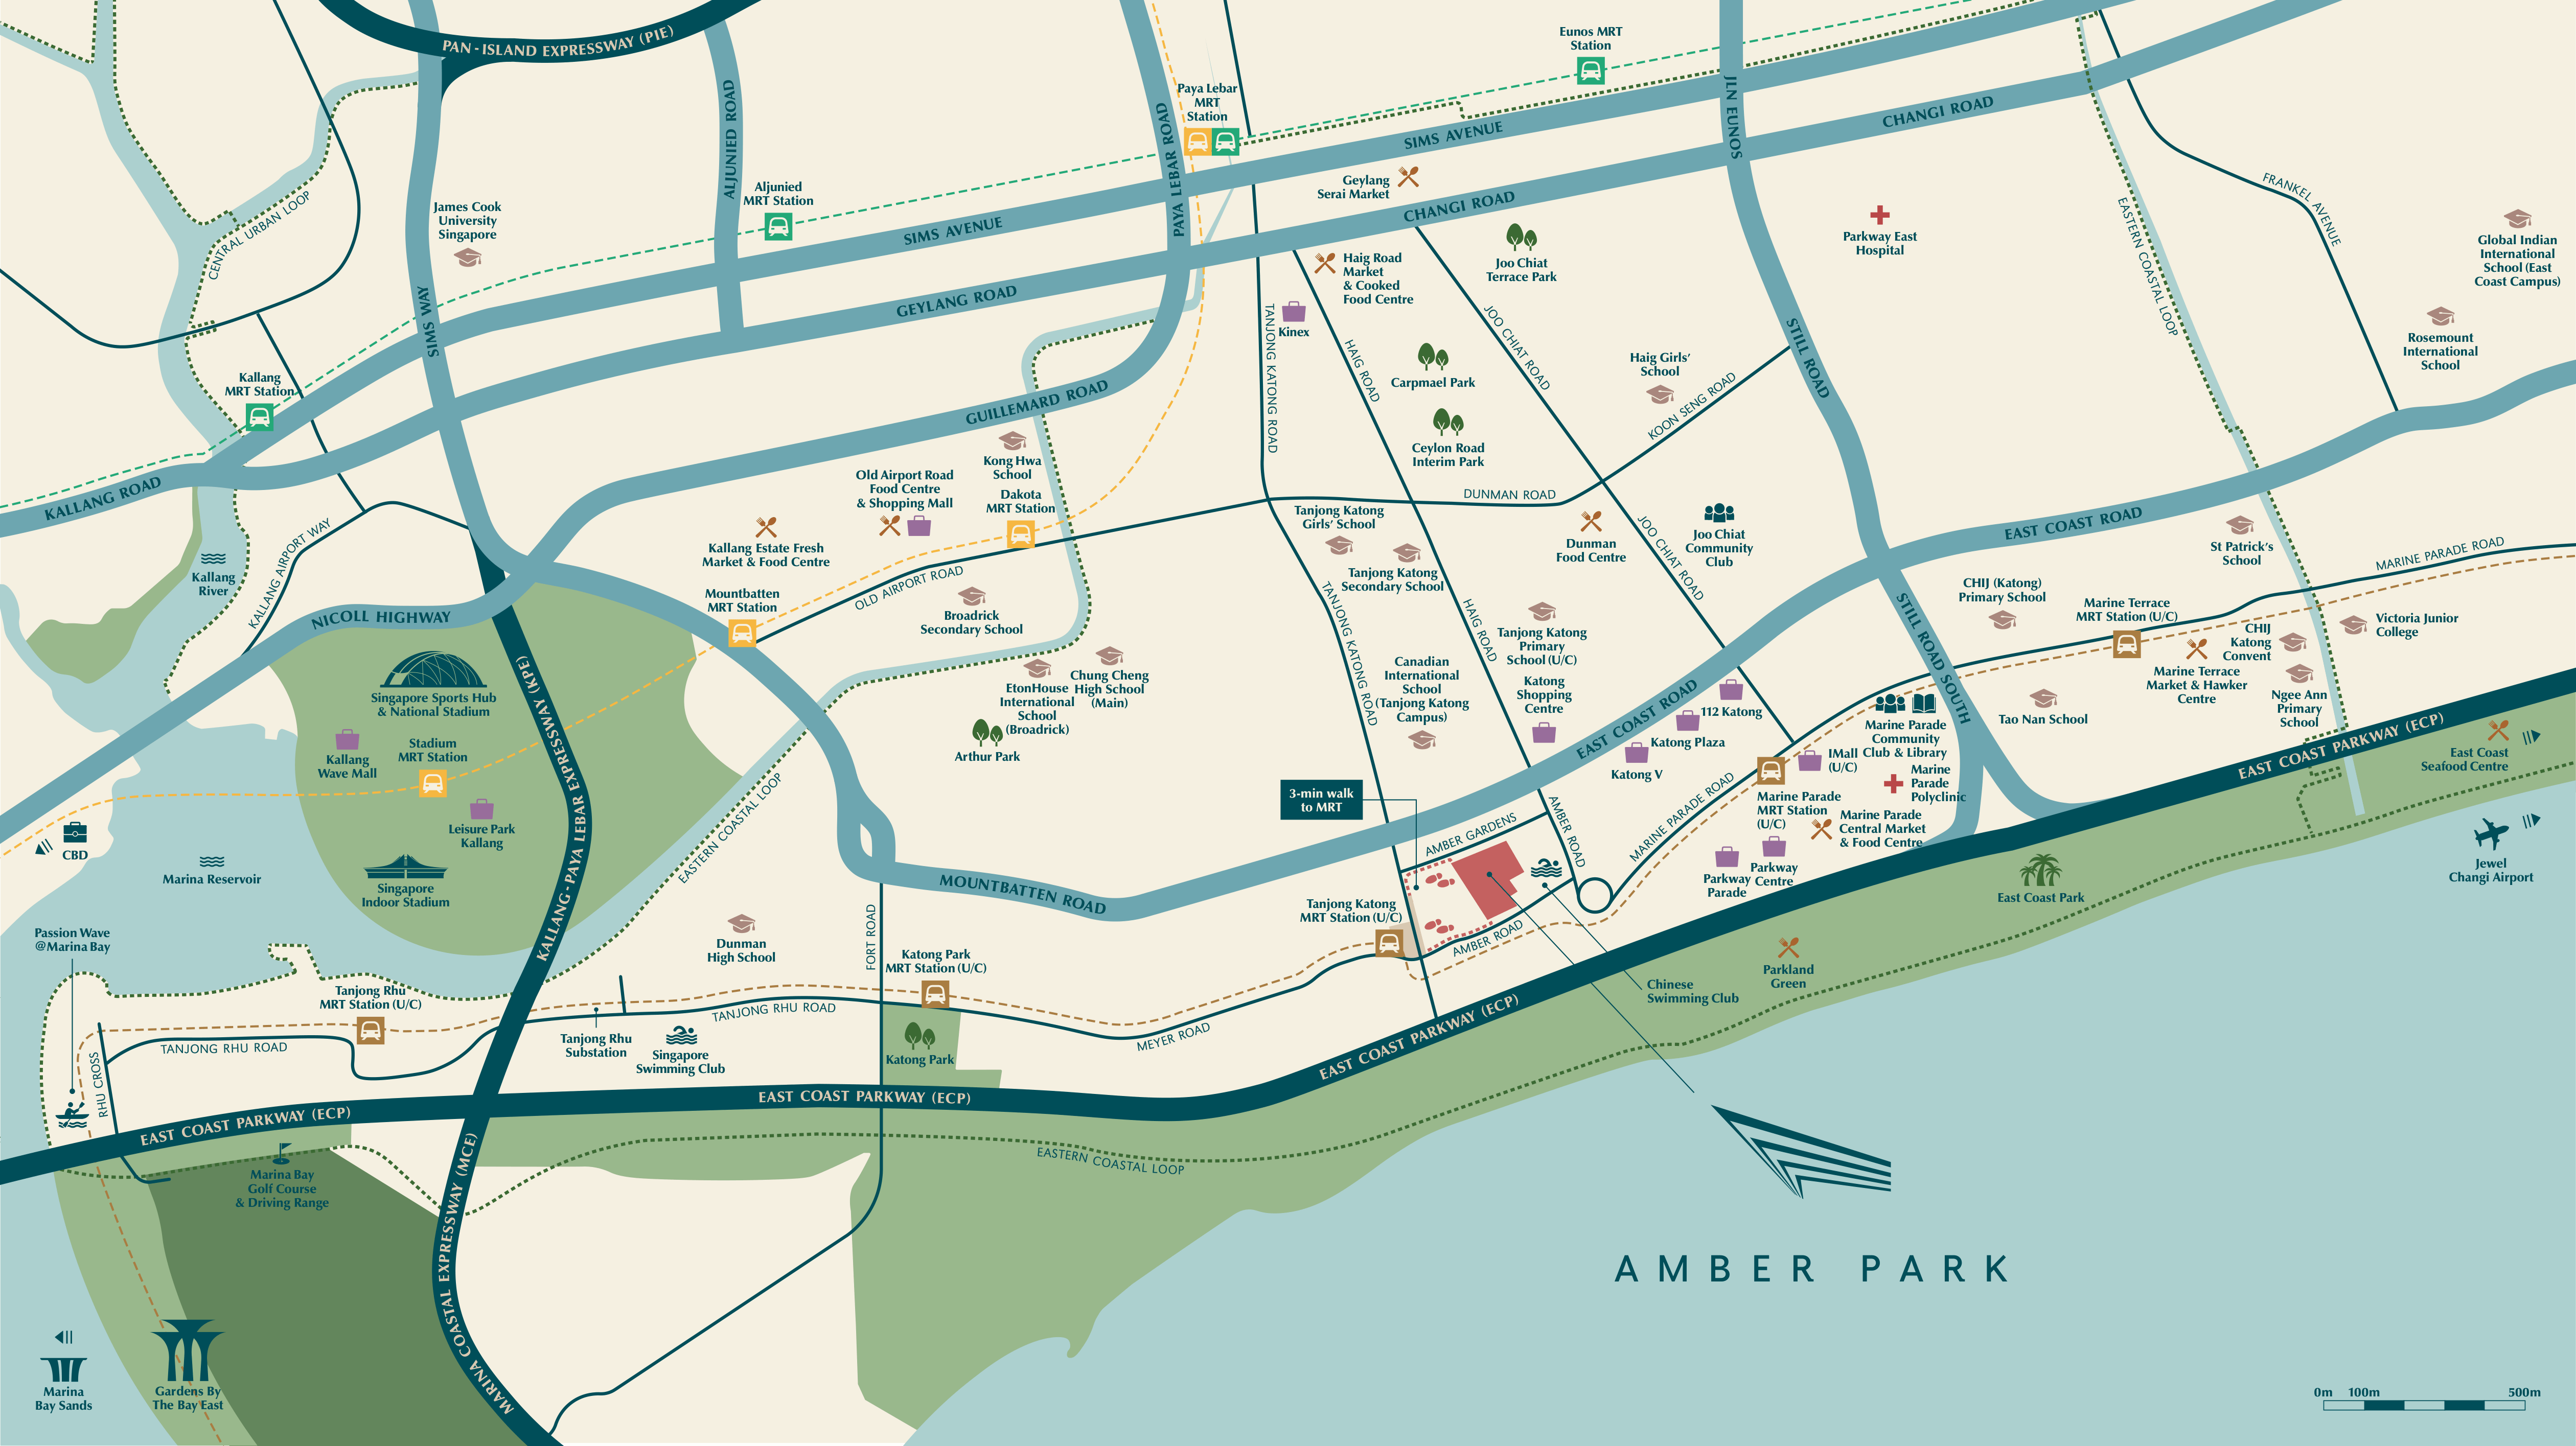 Amber Park - Location Map